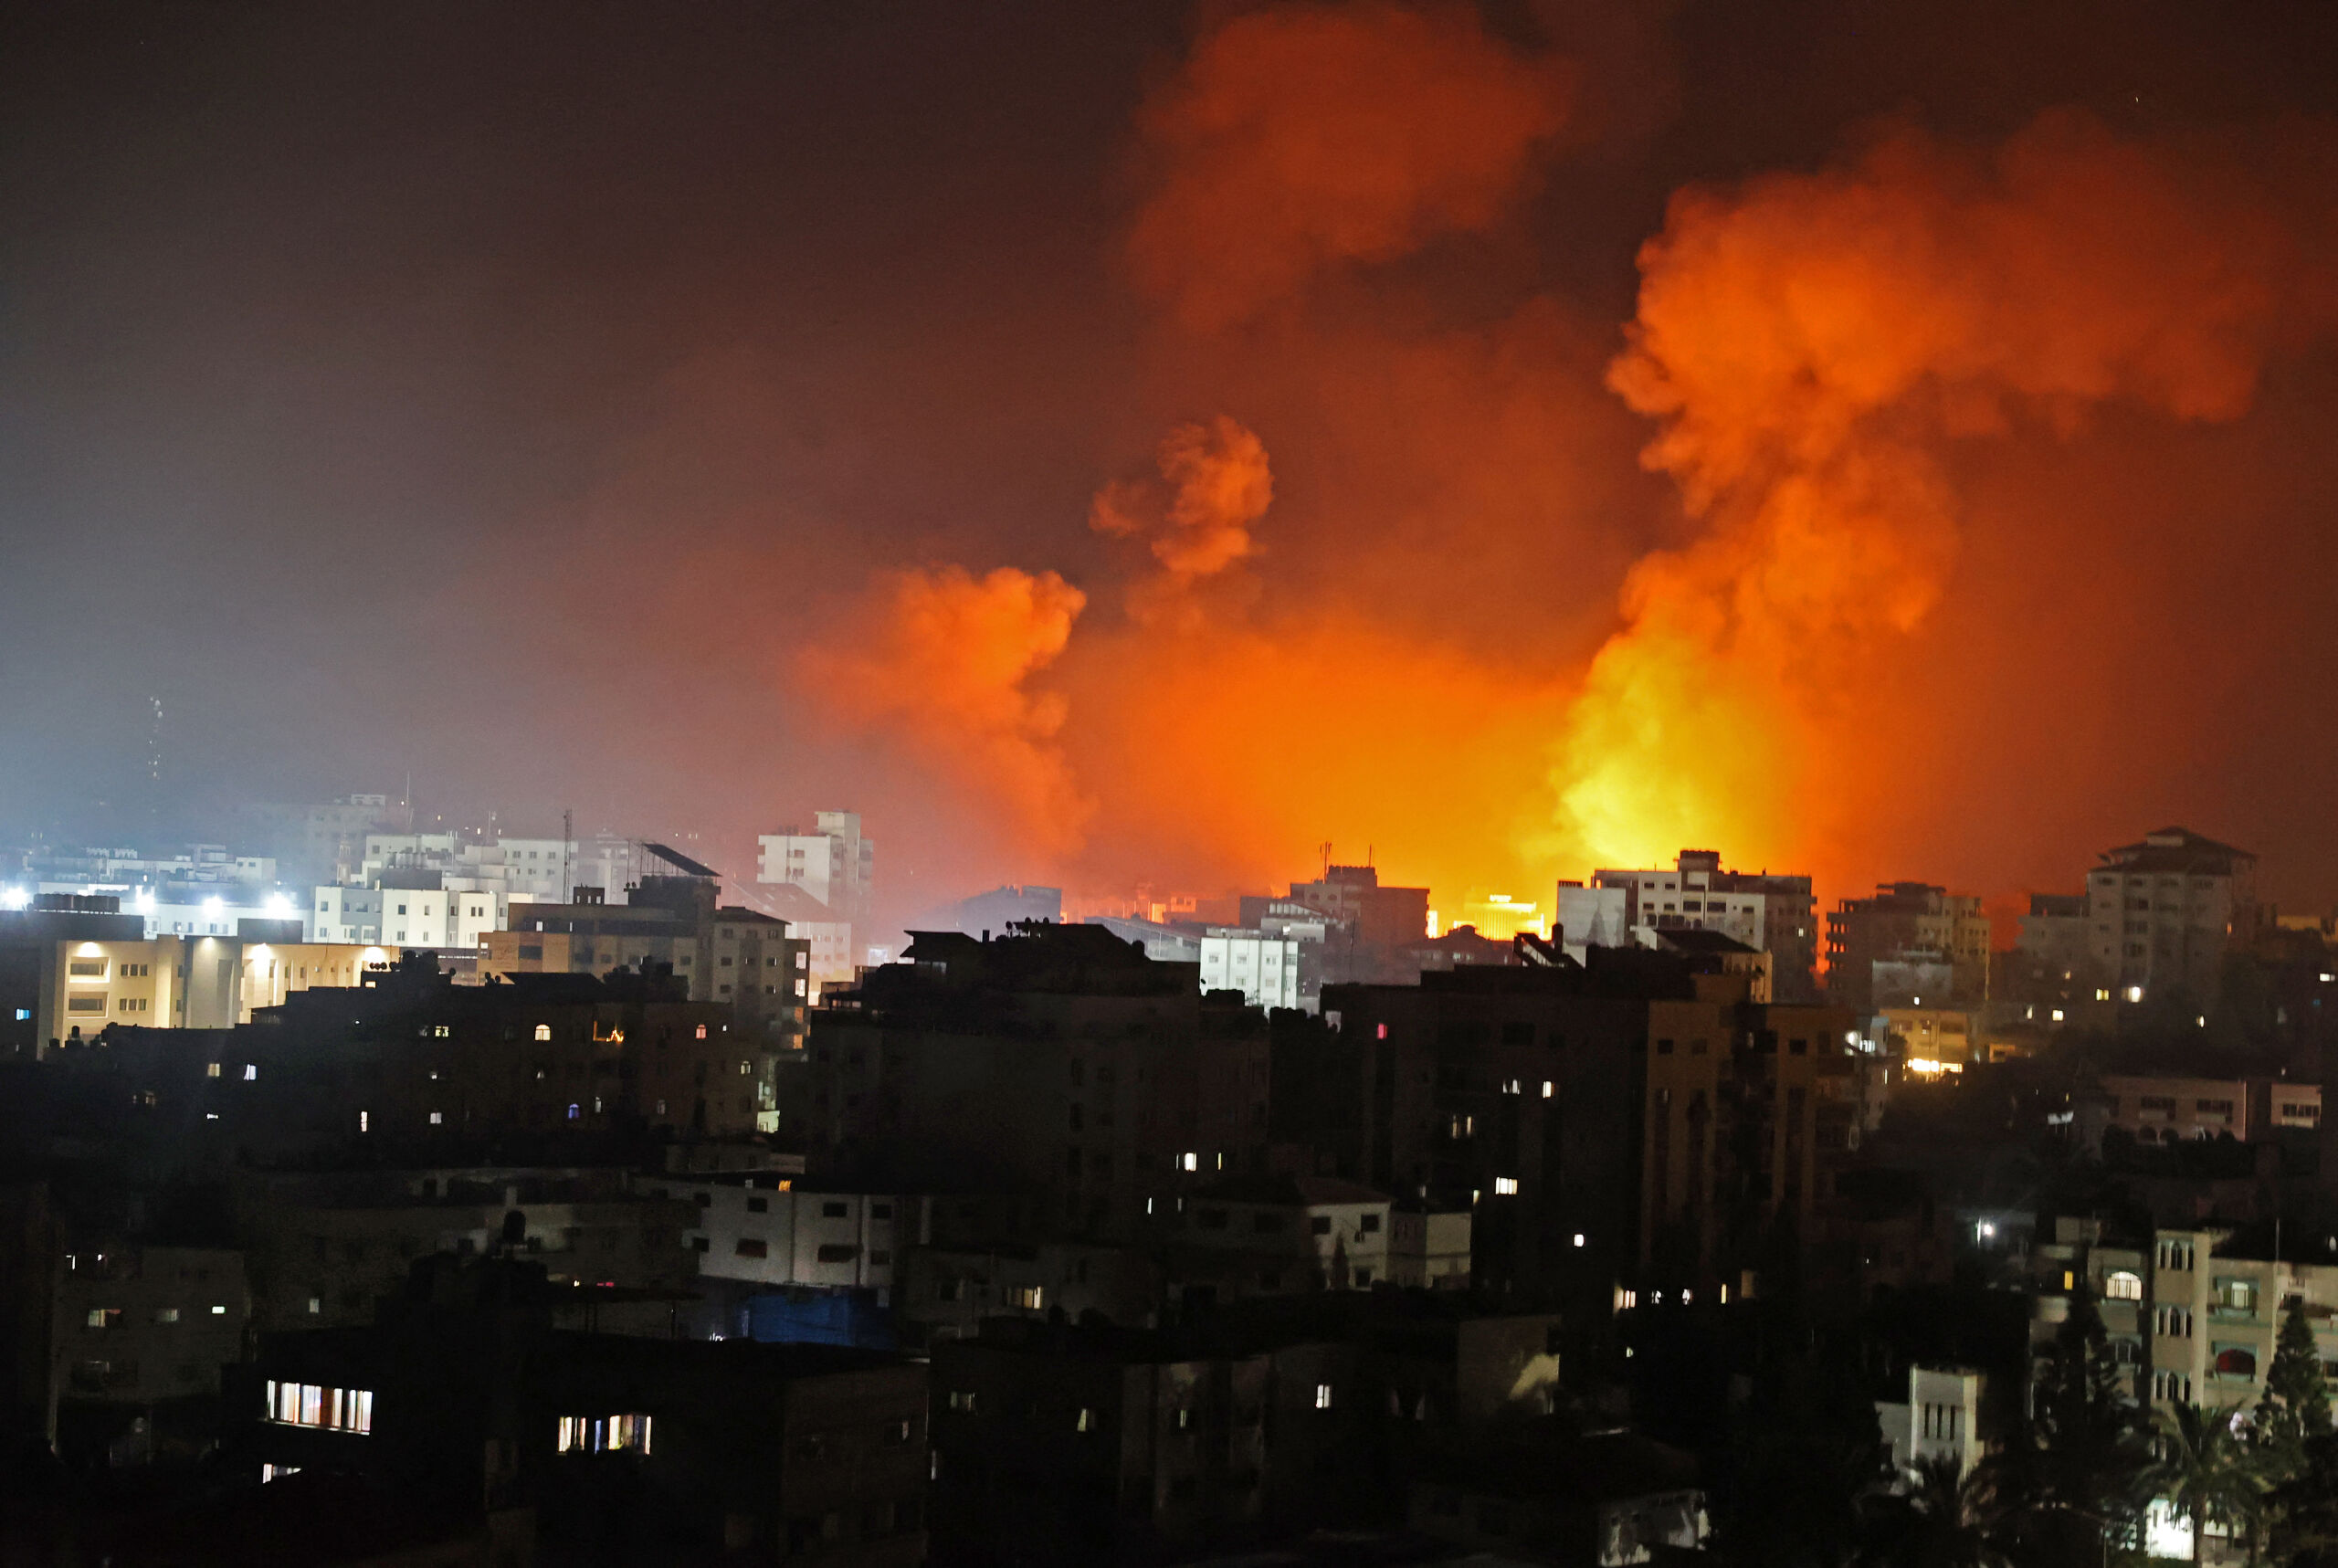 Fire erupts from the Andalus Tower as it is destroyed by an Israeli airstrike in Gaza City, controlled by the Palestinian Hamas movement, early on May 16, 2021. Israel pummelled the Gaza Strip with air strikes, killing 10 members of an extended family and demolishing a building housing international media outlets, as Palestinian militants fired back barrages of rockets. MOHAMMED ABED / AFP